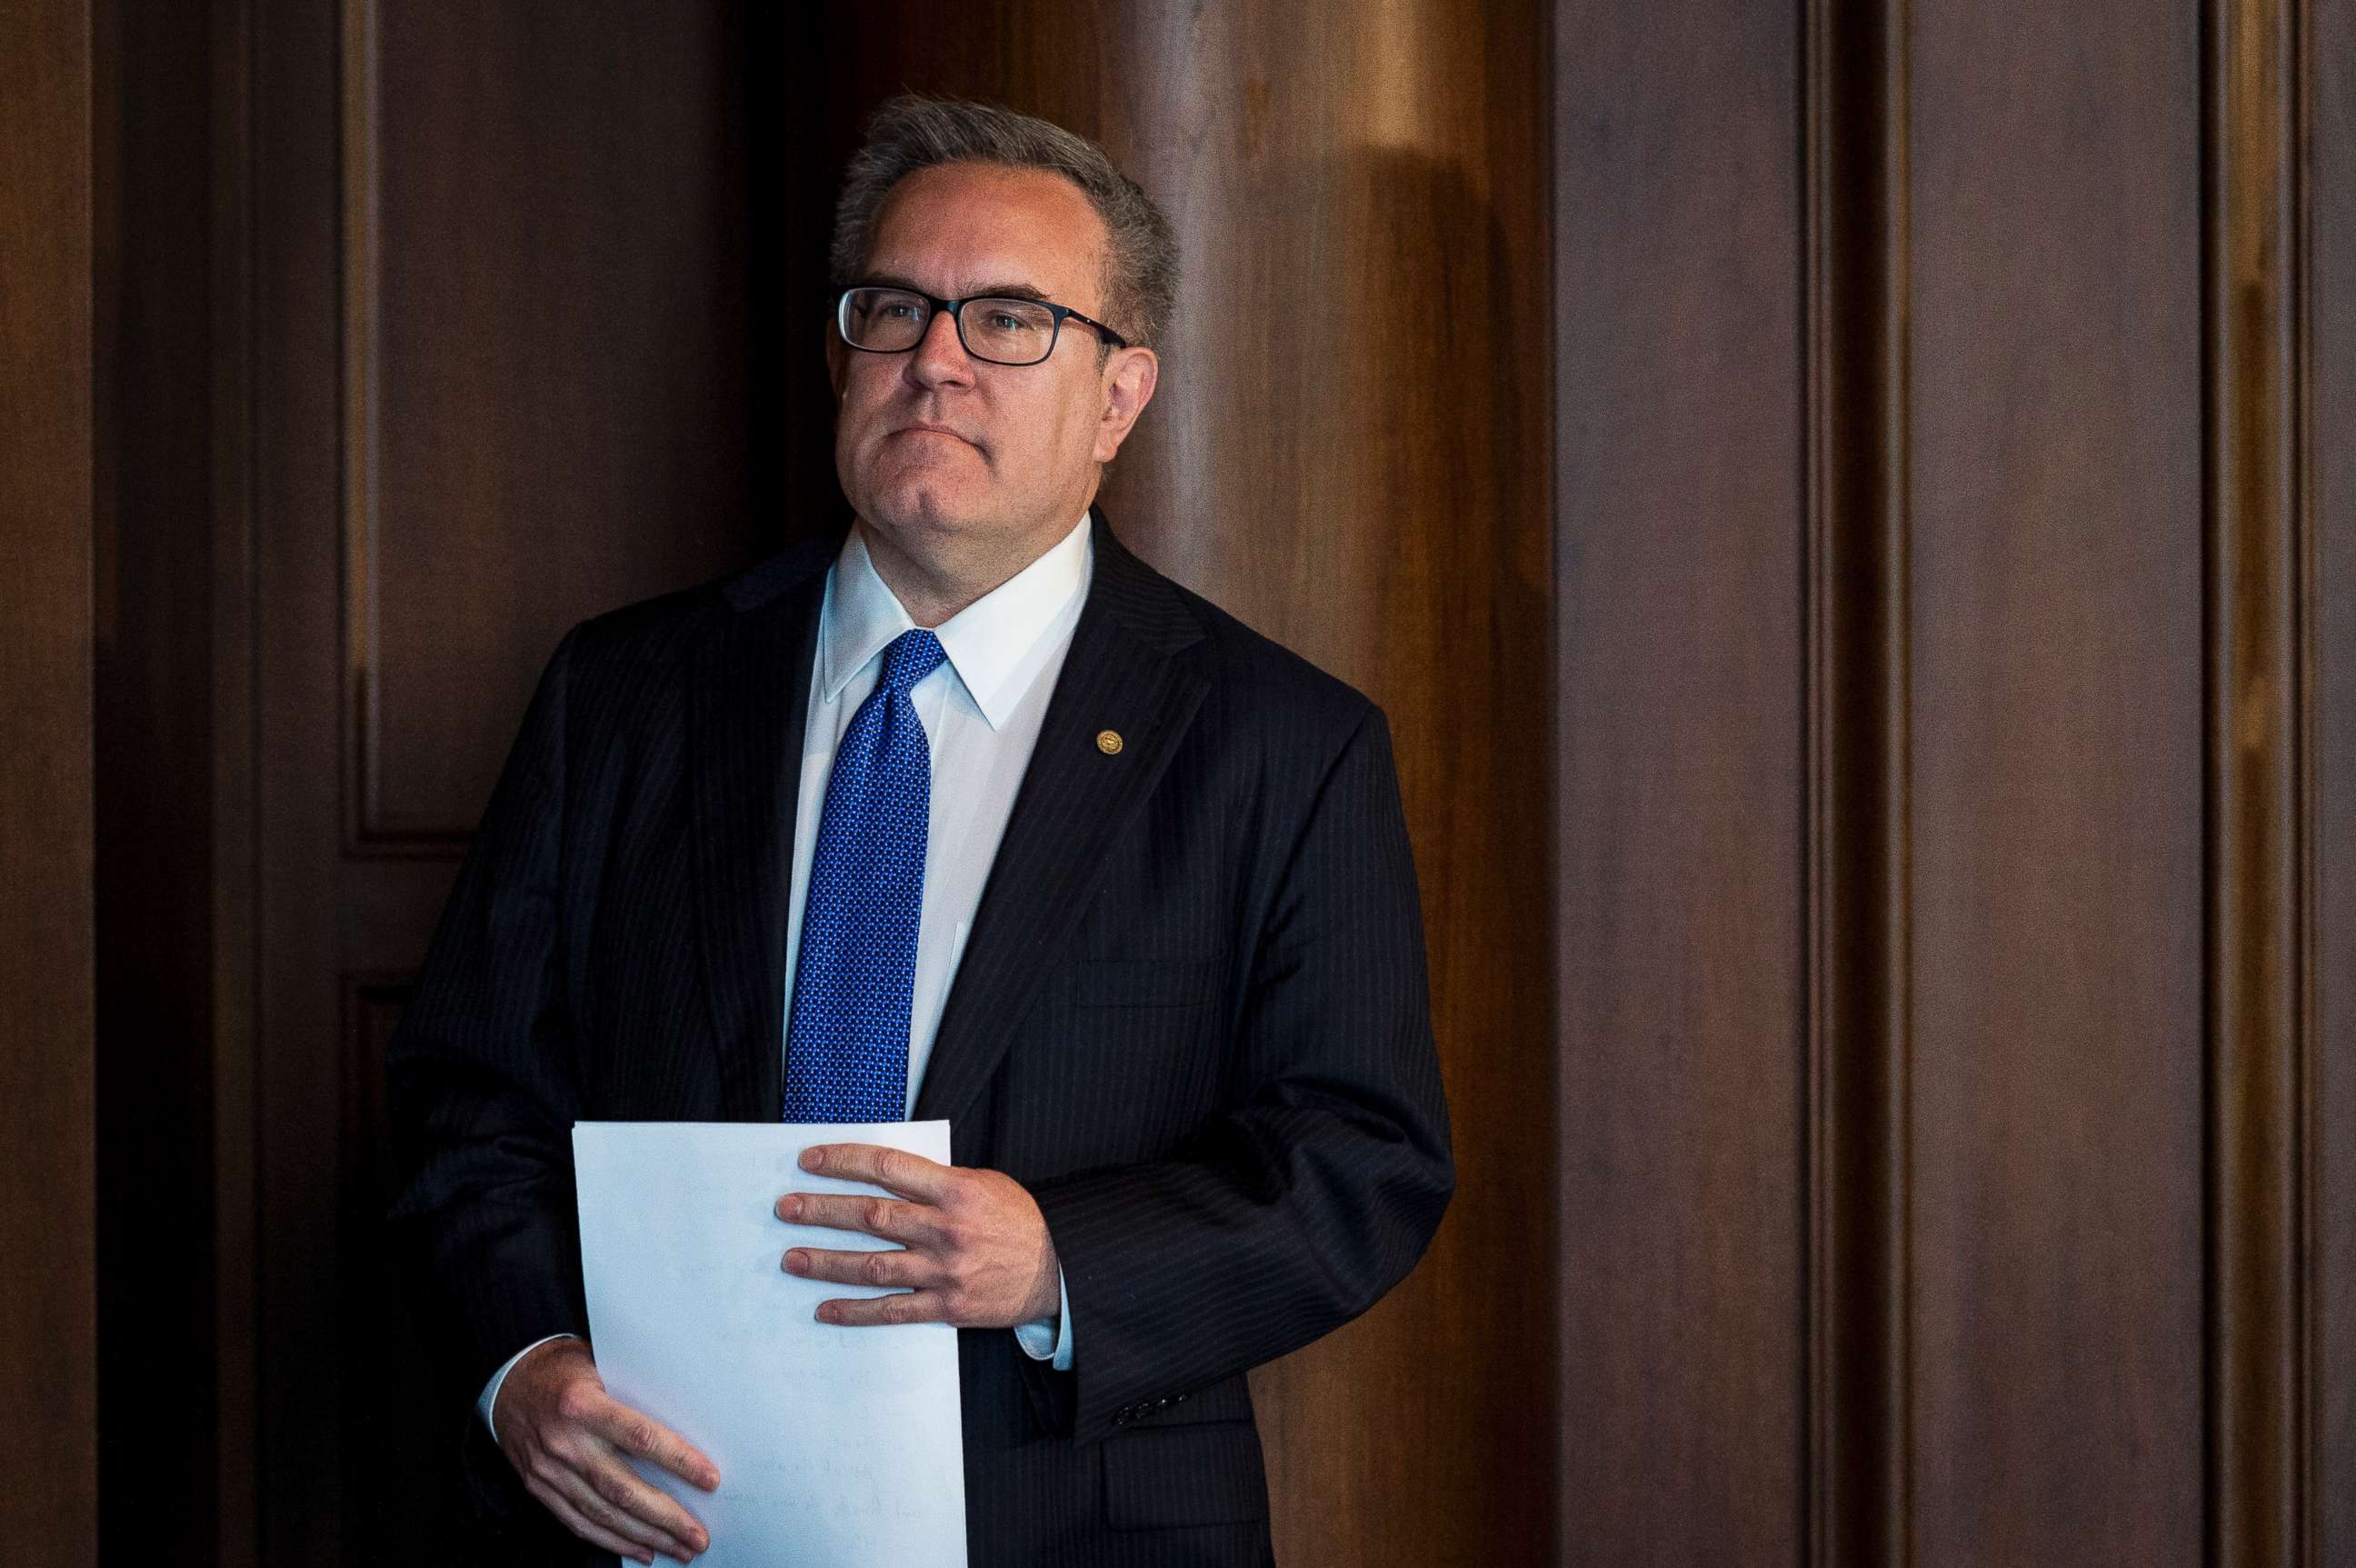 PHOTO: Andrew Wheeler, the Environmental Protection Agency's acting administrator, waits as he is introduced to address staff at the administration's headquarters in Washington, July 11, 2018.